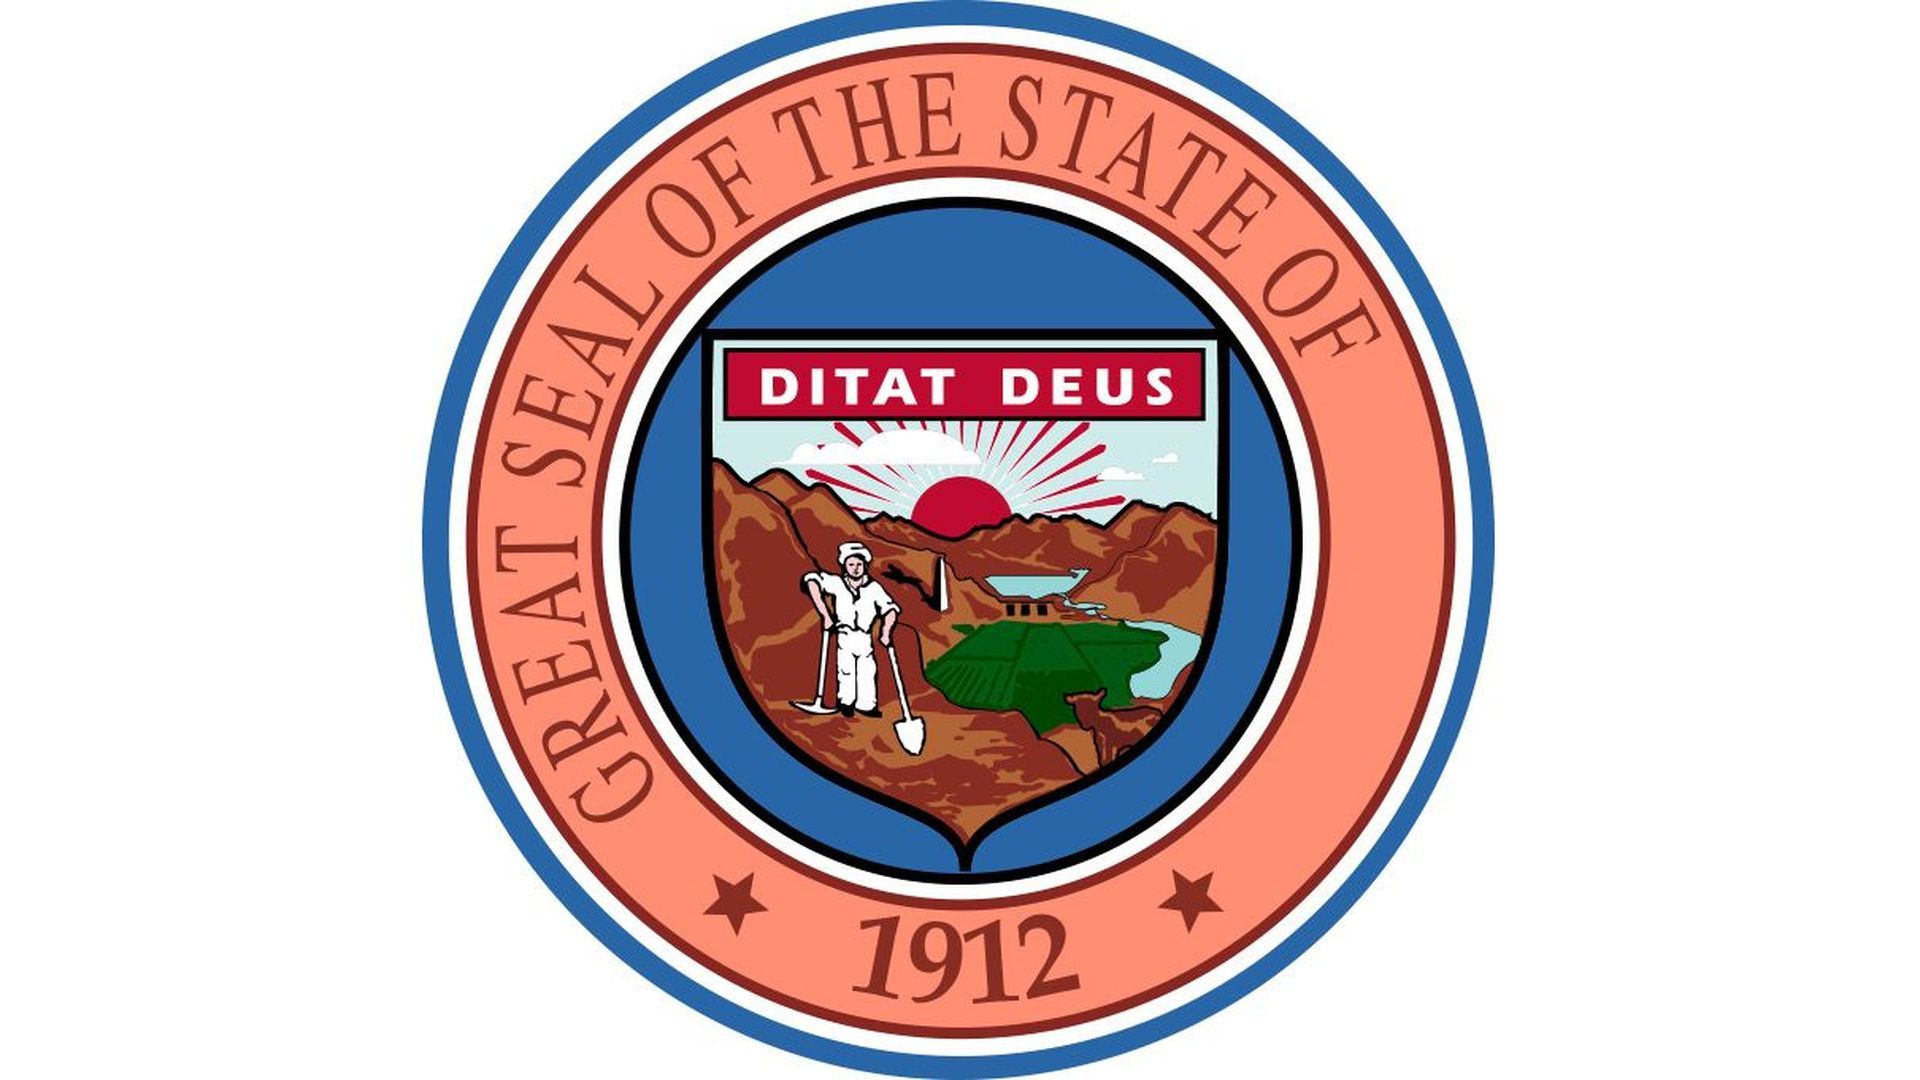 Can You Identify These State Seals?